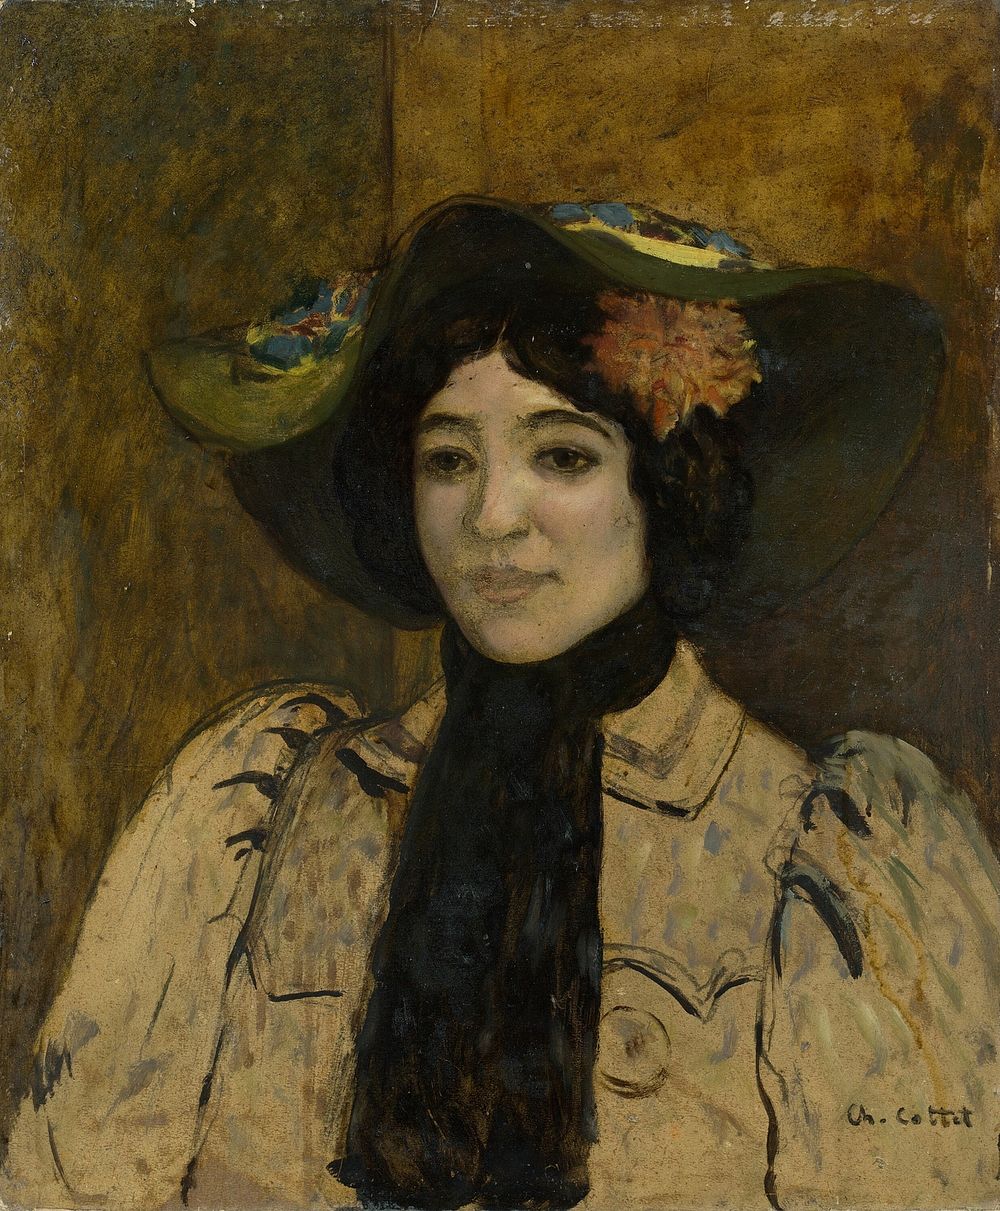 Portrait of a Woman by Charles Cottet